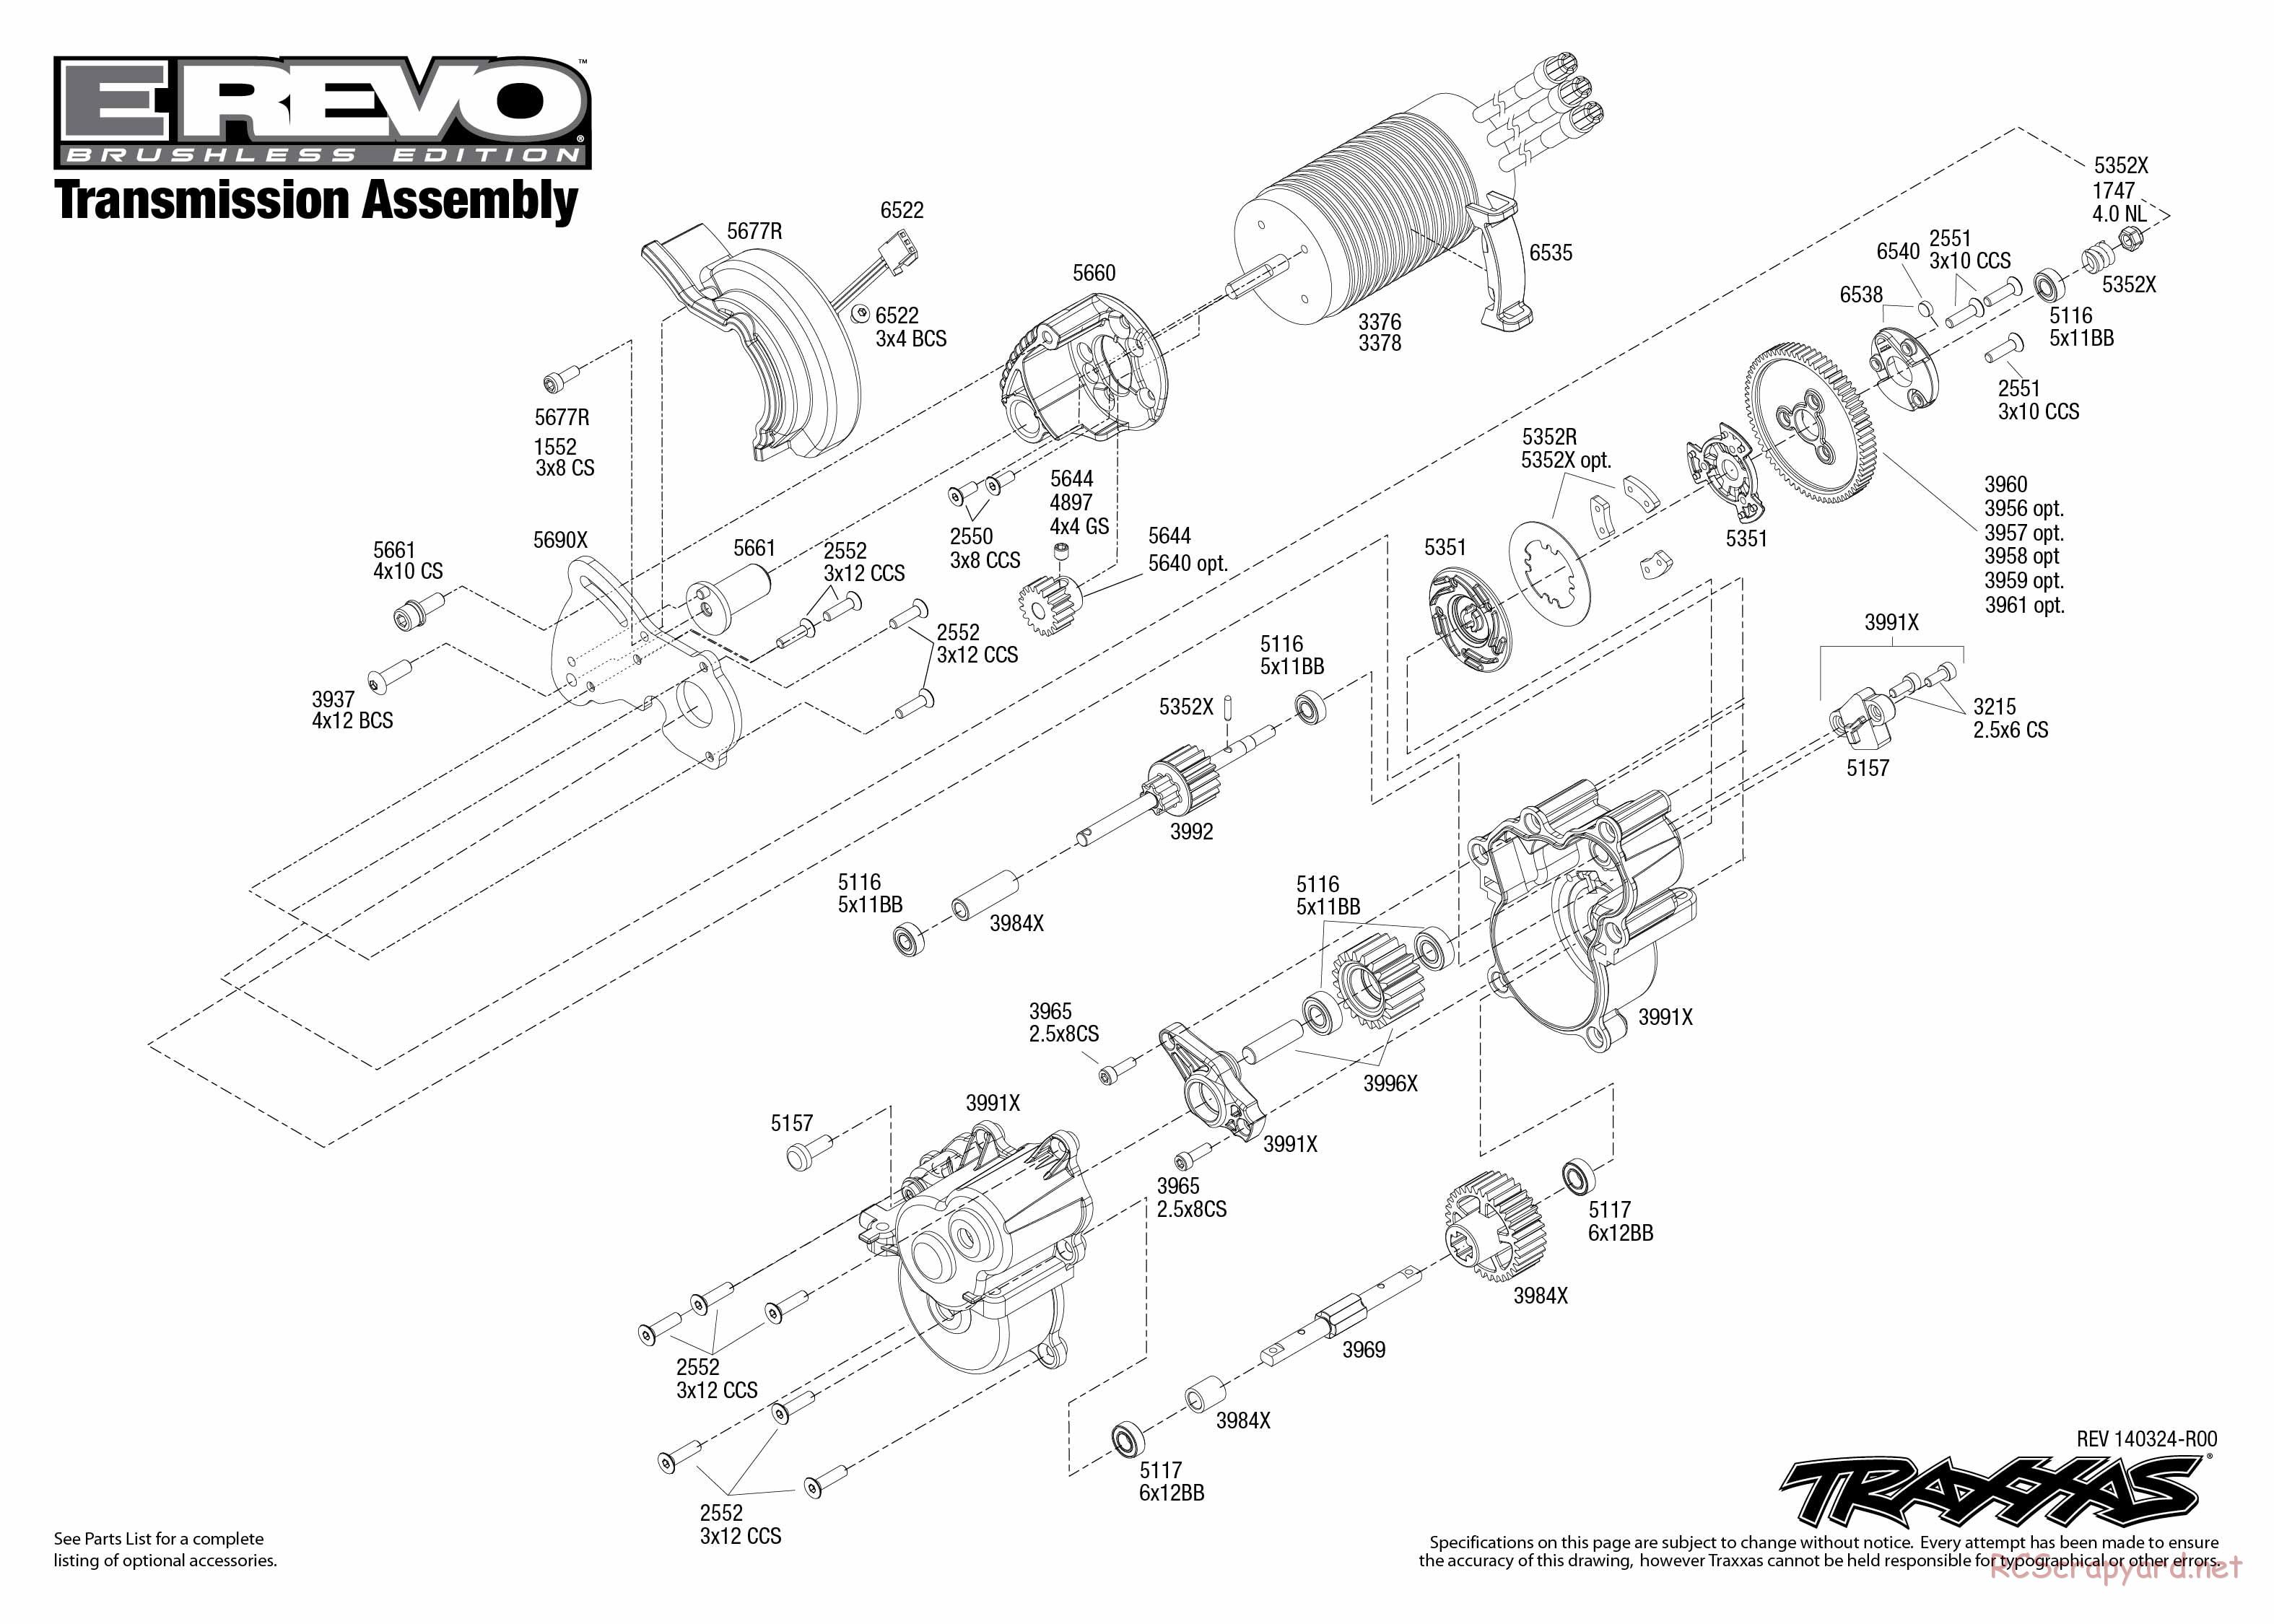 Traxxas - E-Revo Brushless (2014) - Exploded Views - Page 5